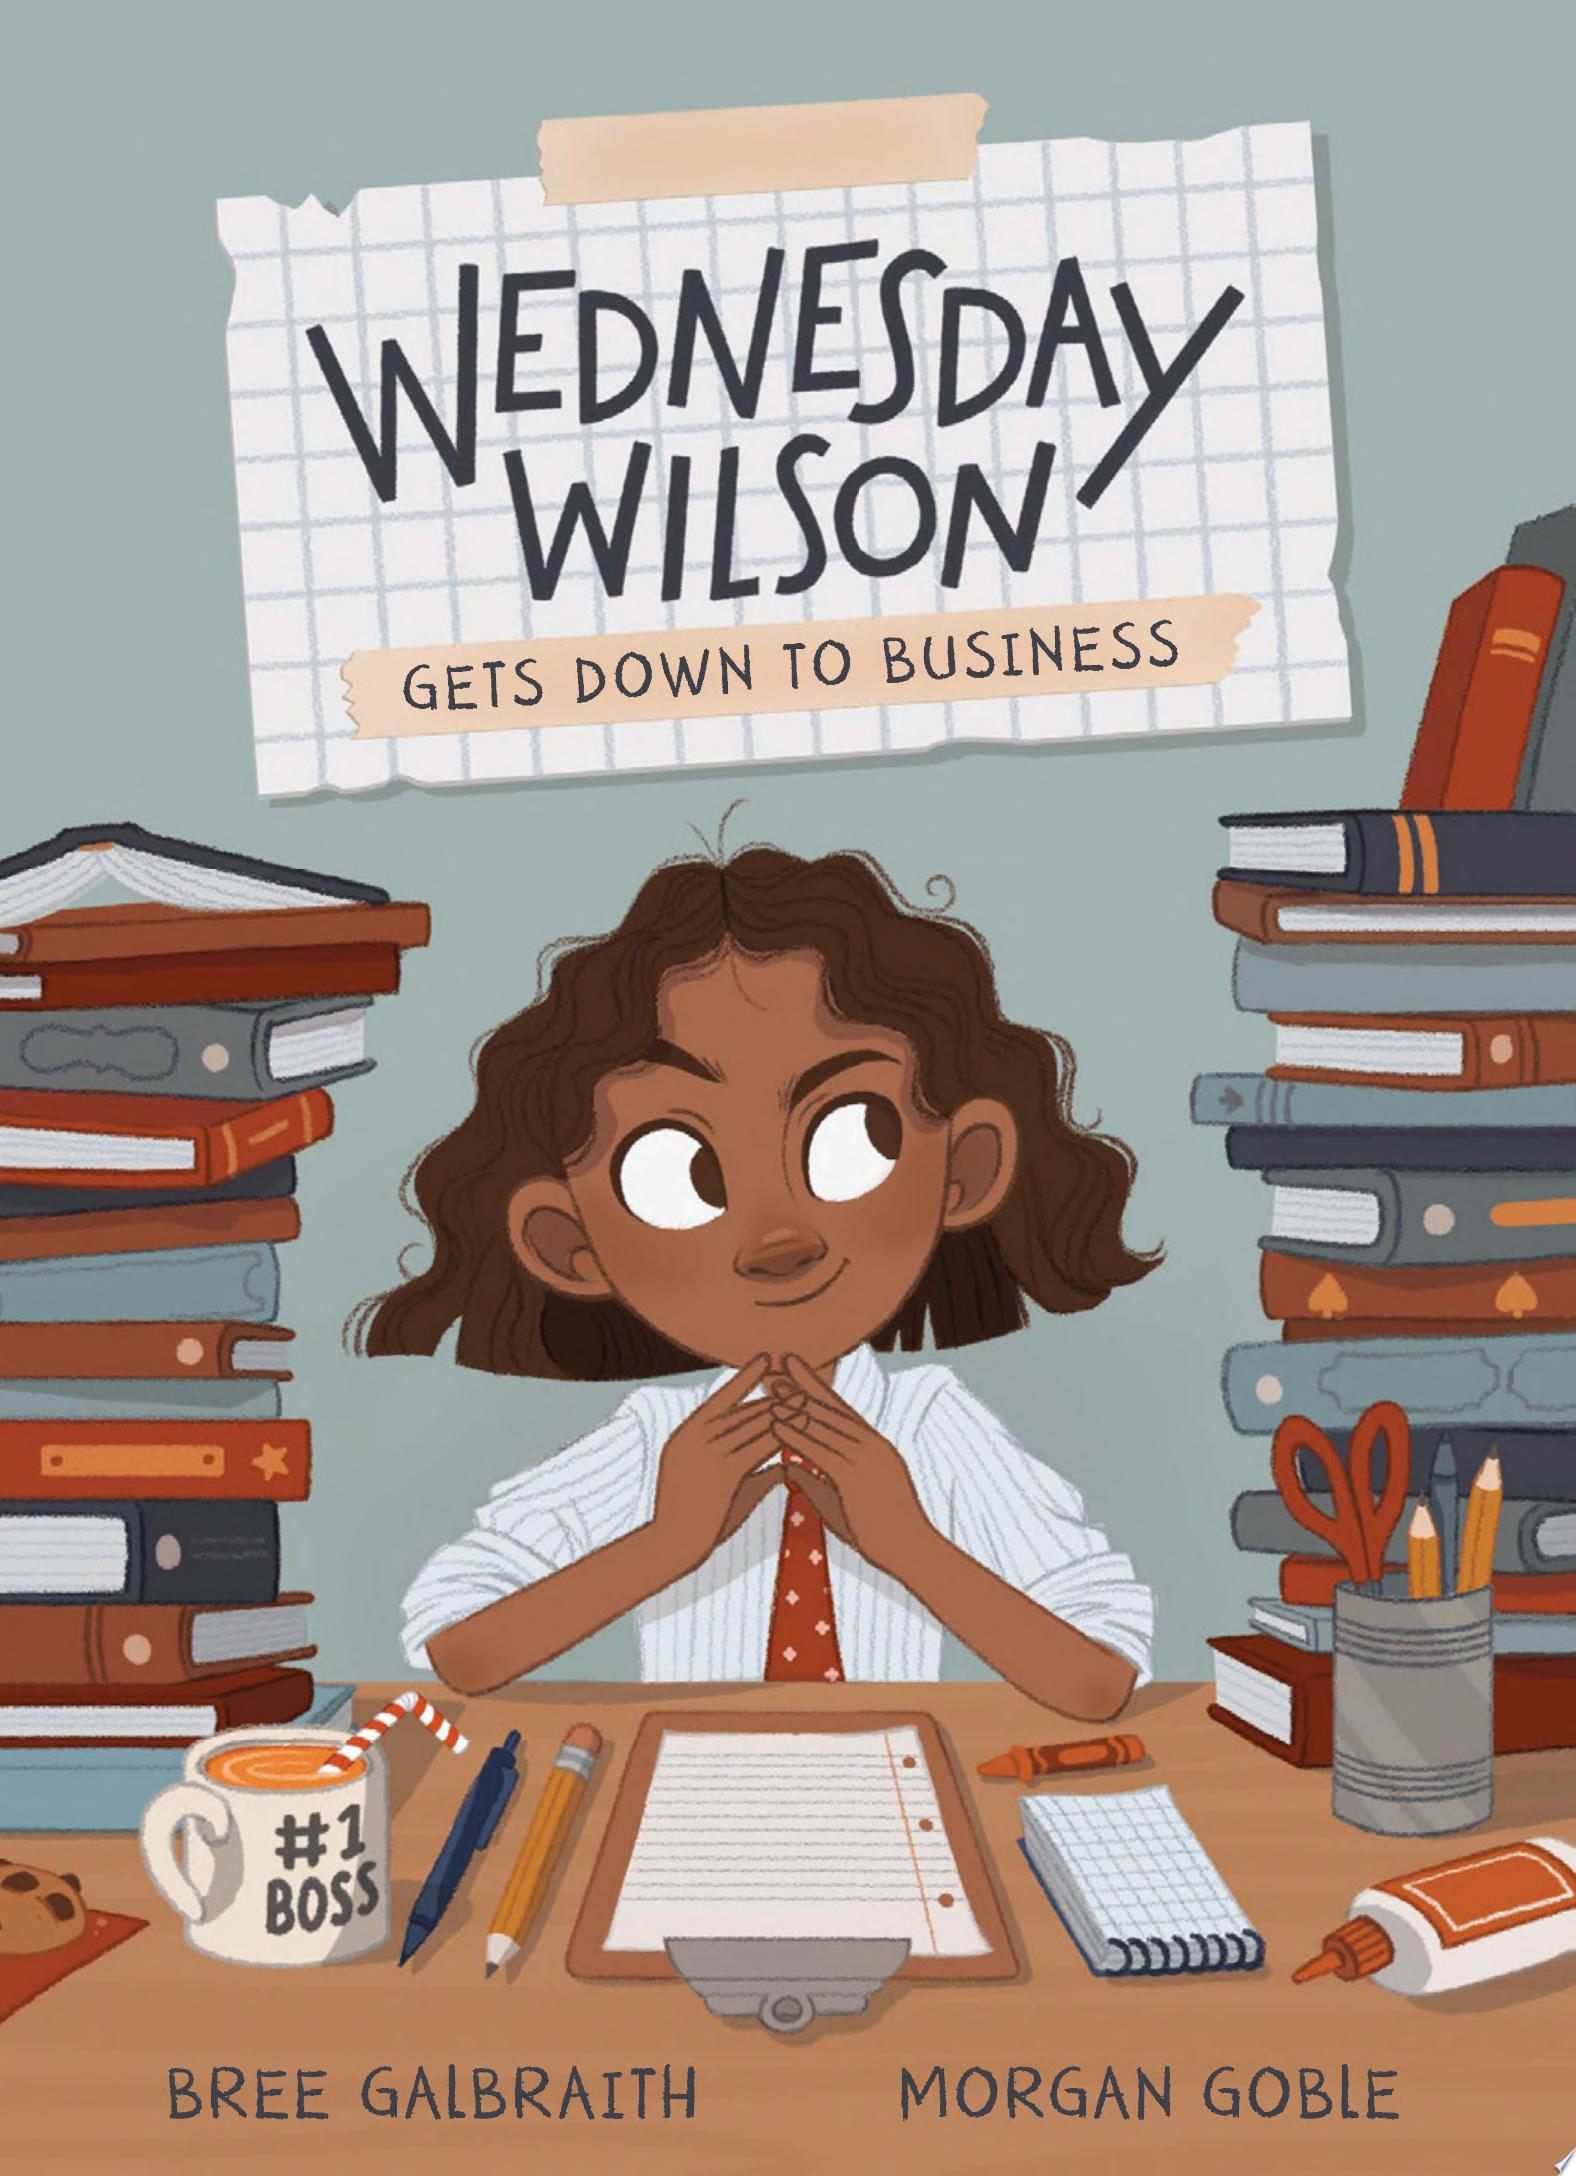 Image for "Wednesday Wilson Gets Down to Business"